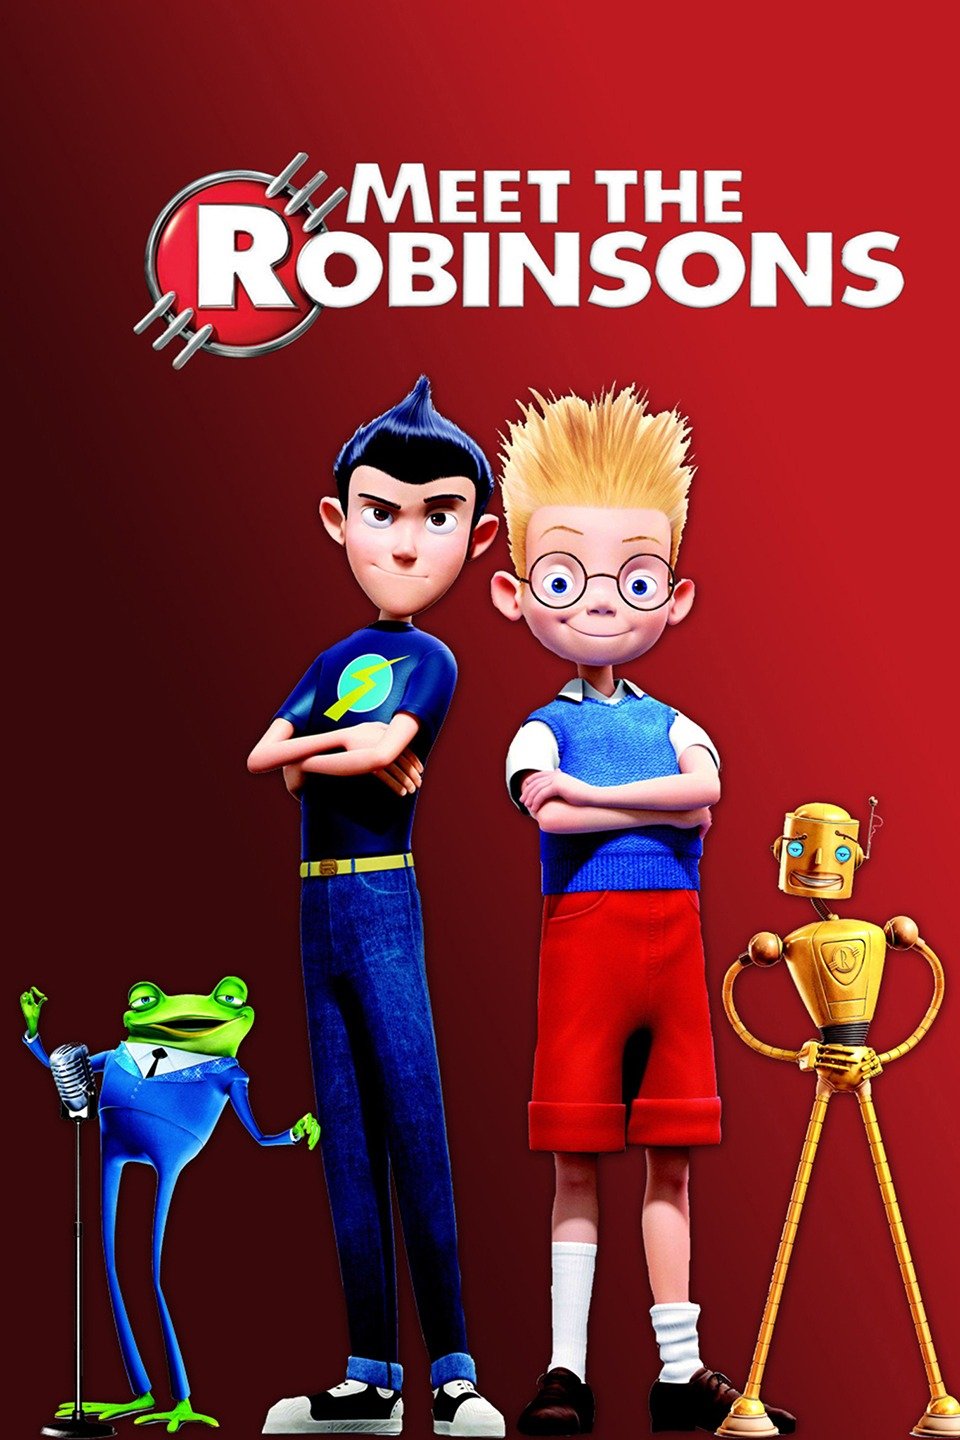 Meet the Robinsons. Movie Poster. Cartoon. Red. Frog. Robot.